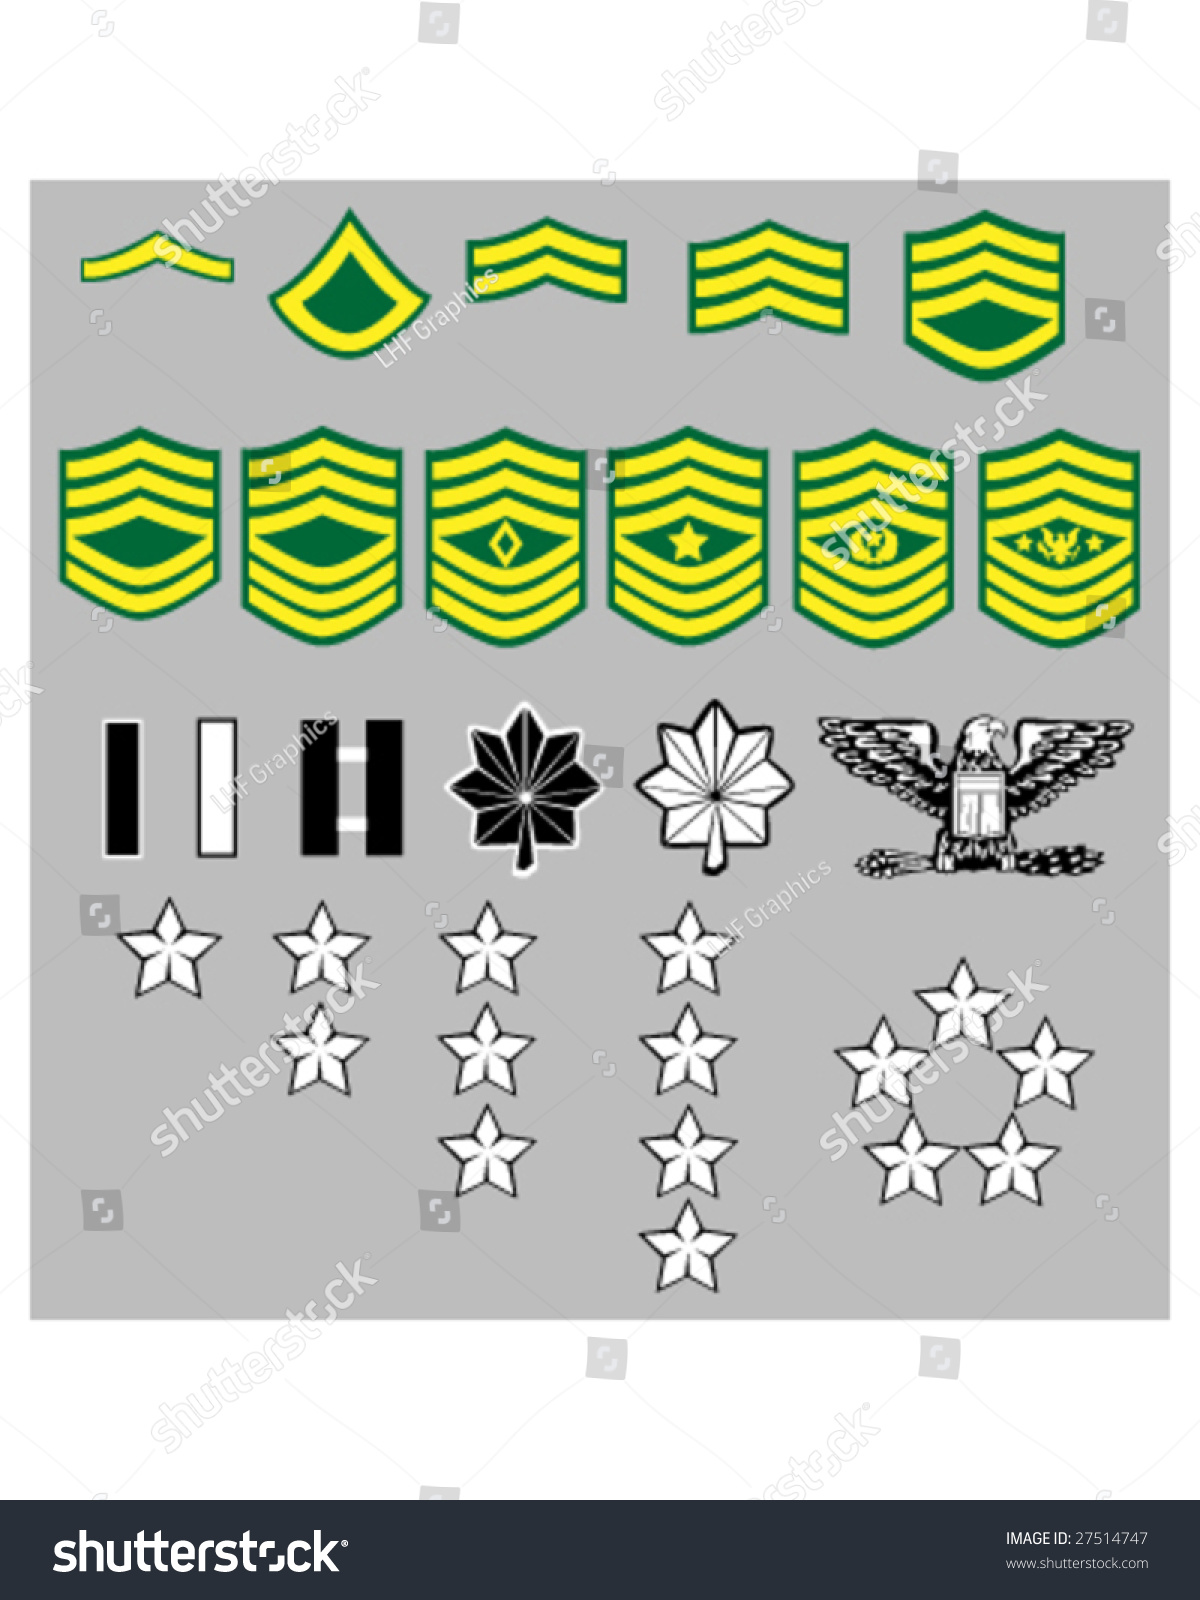 Us Army Rank Insignia Officers Enlisted Stock Vector 27514747 ...